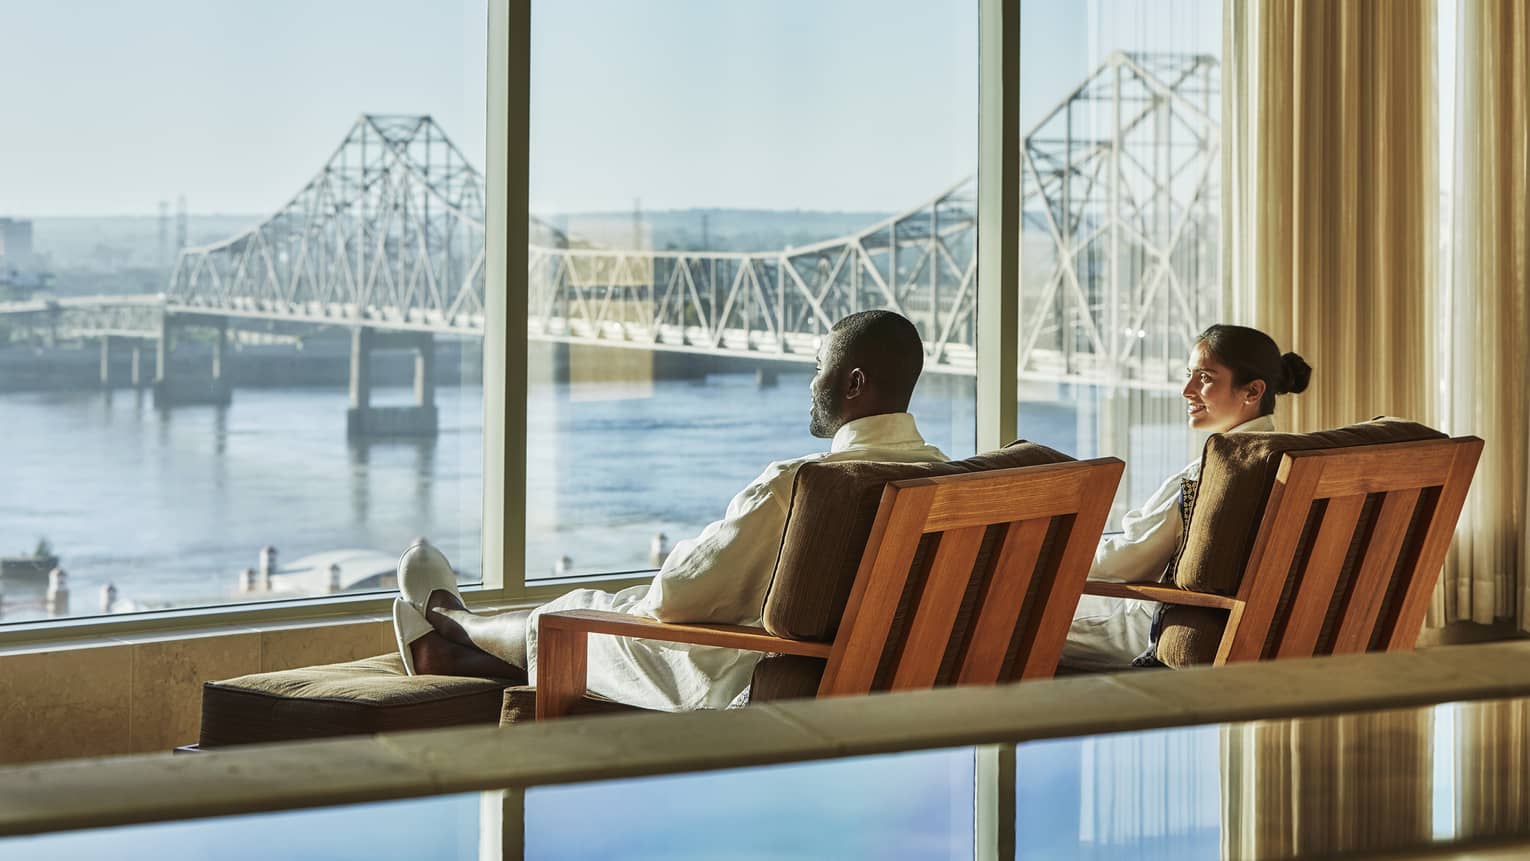 Couple lounge in chairs by large windows overlooking water, St. Louis bridge